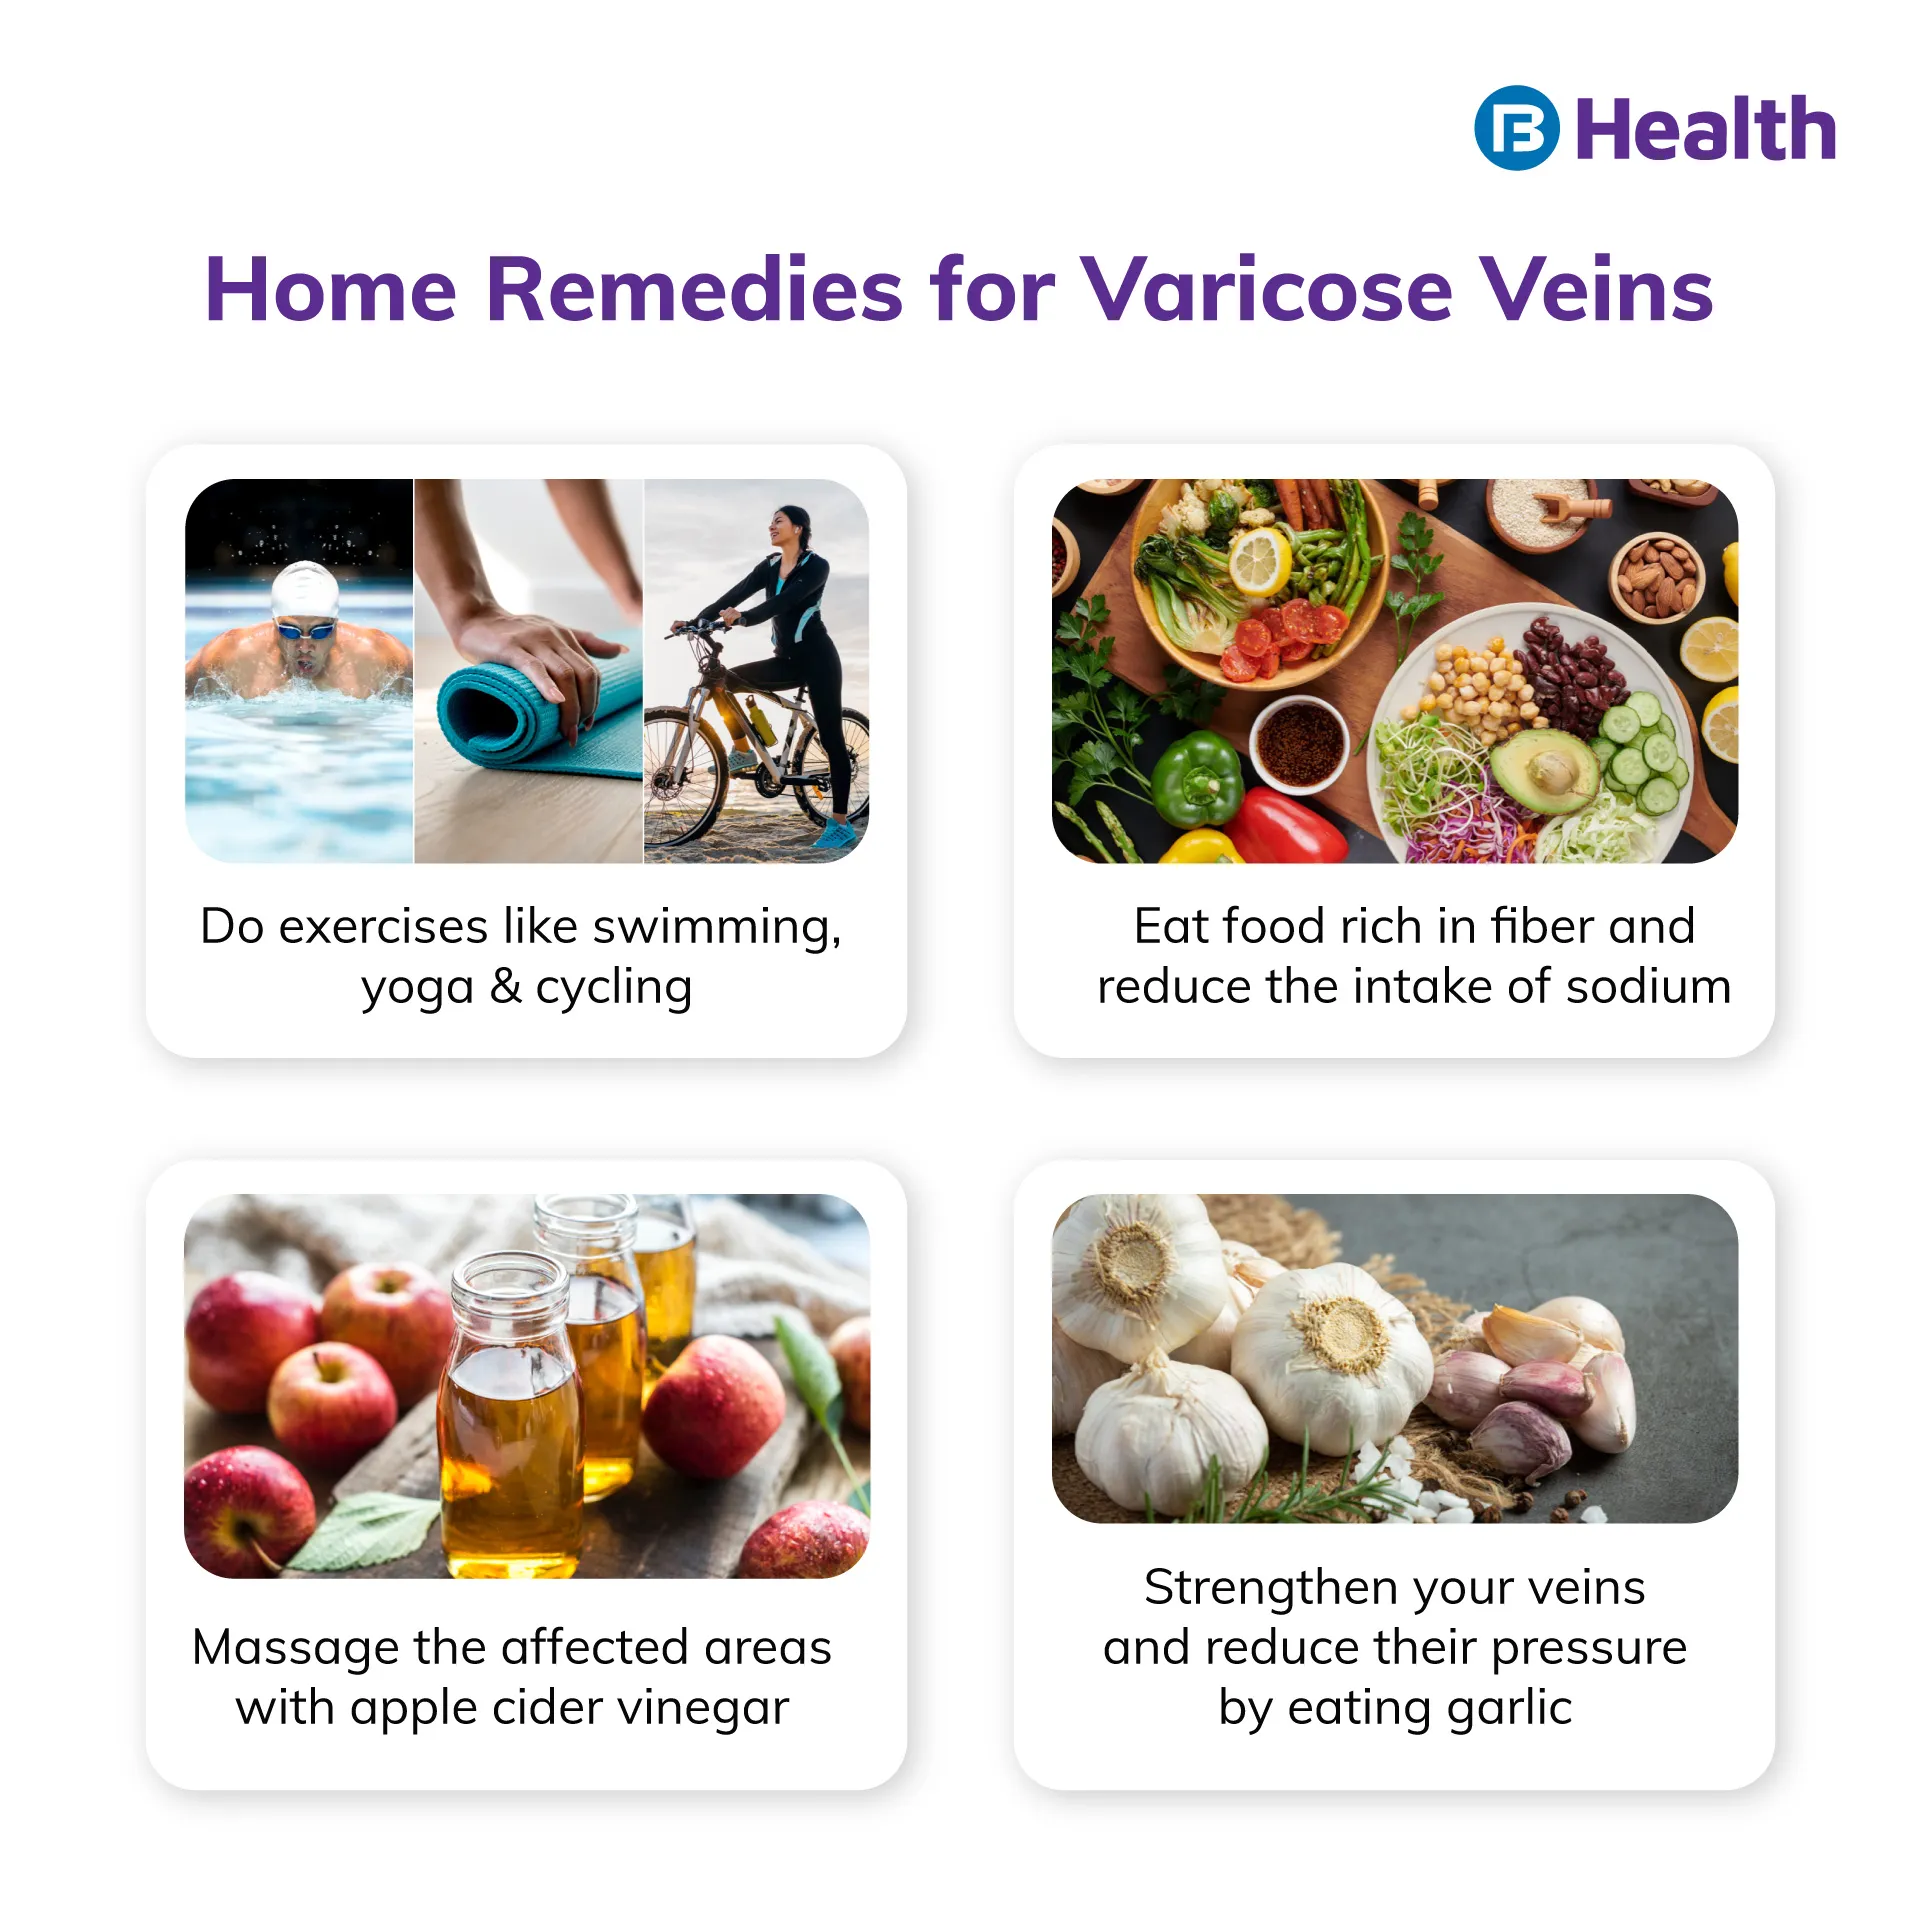 Home remedies for Varicose Veins